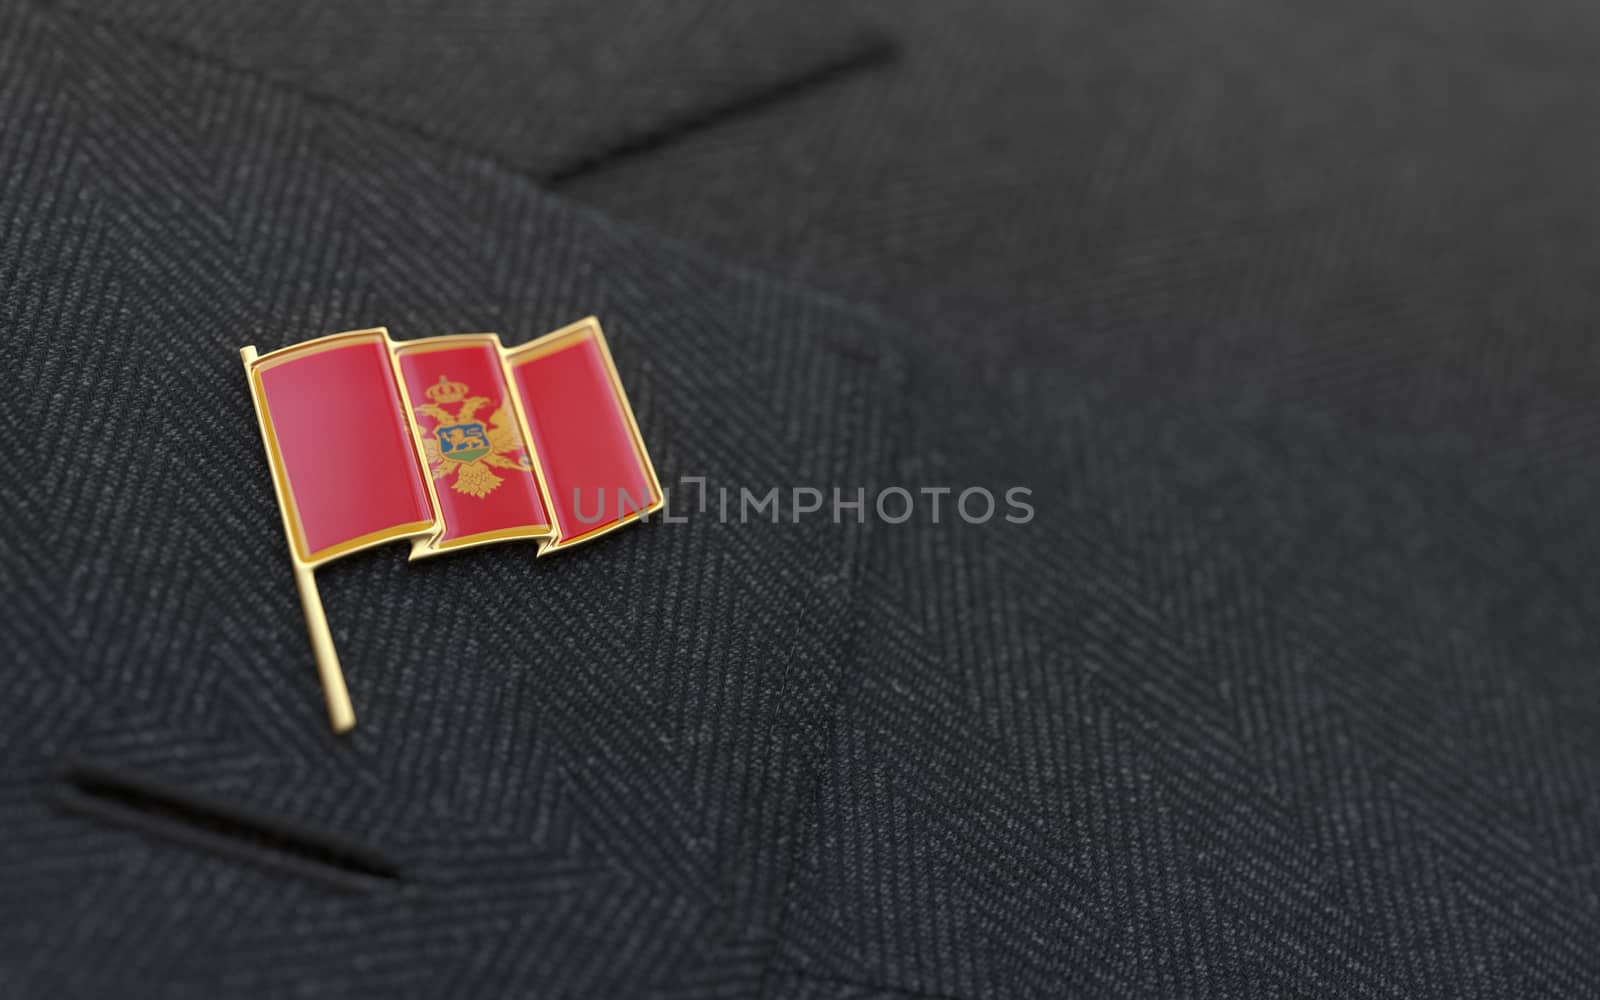 Montenegro flag lapel pin on the collar of a business suit jacket shows patriotism